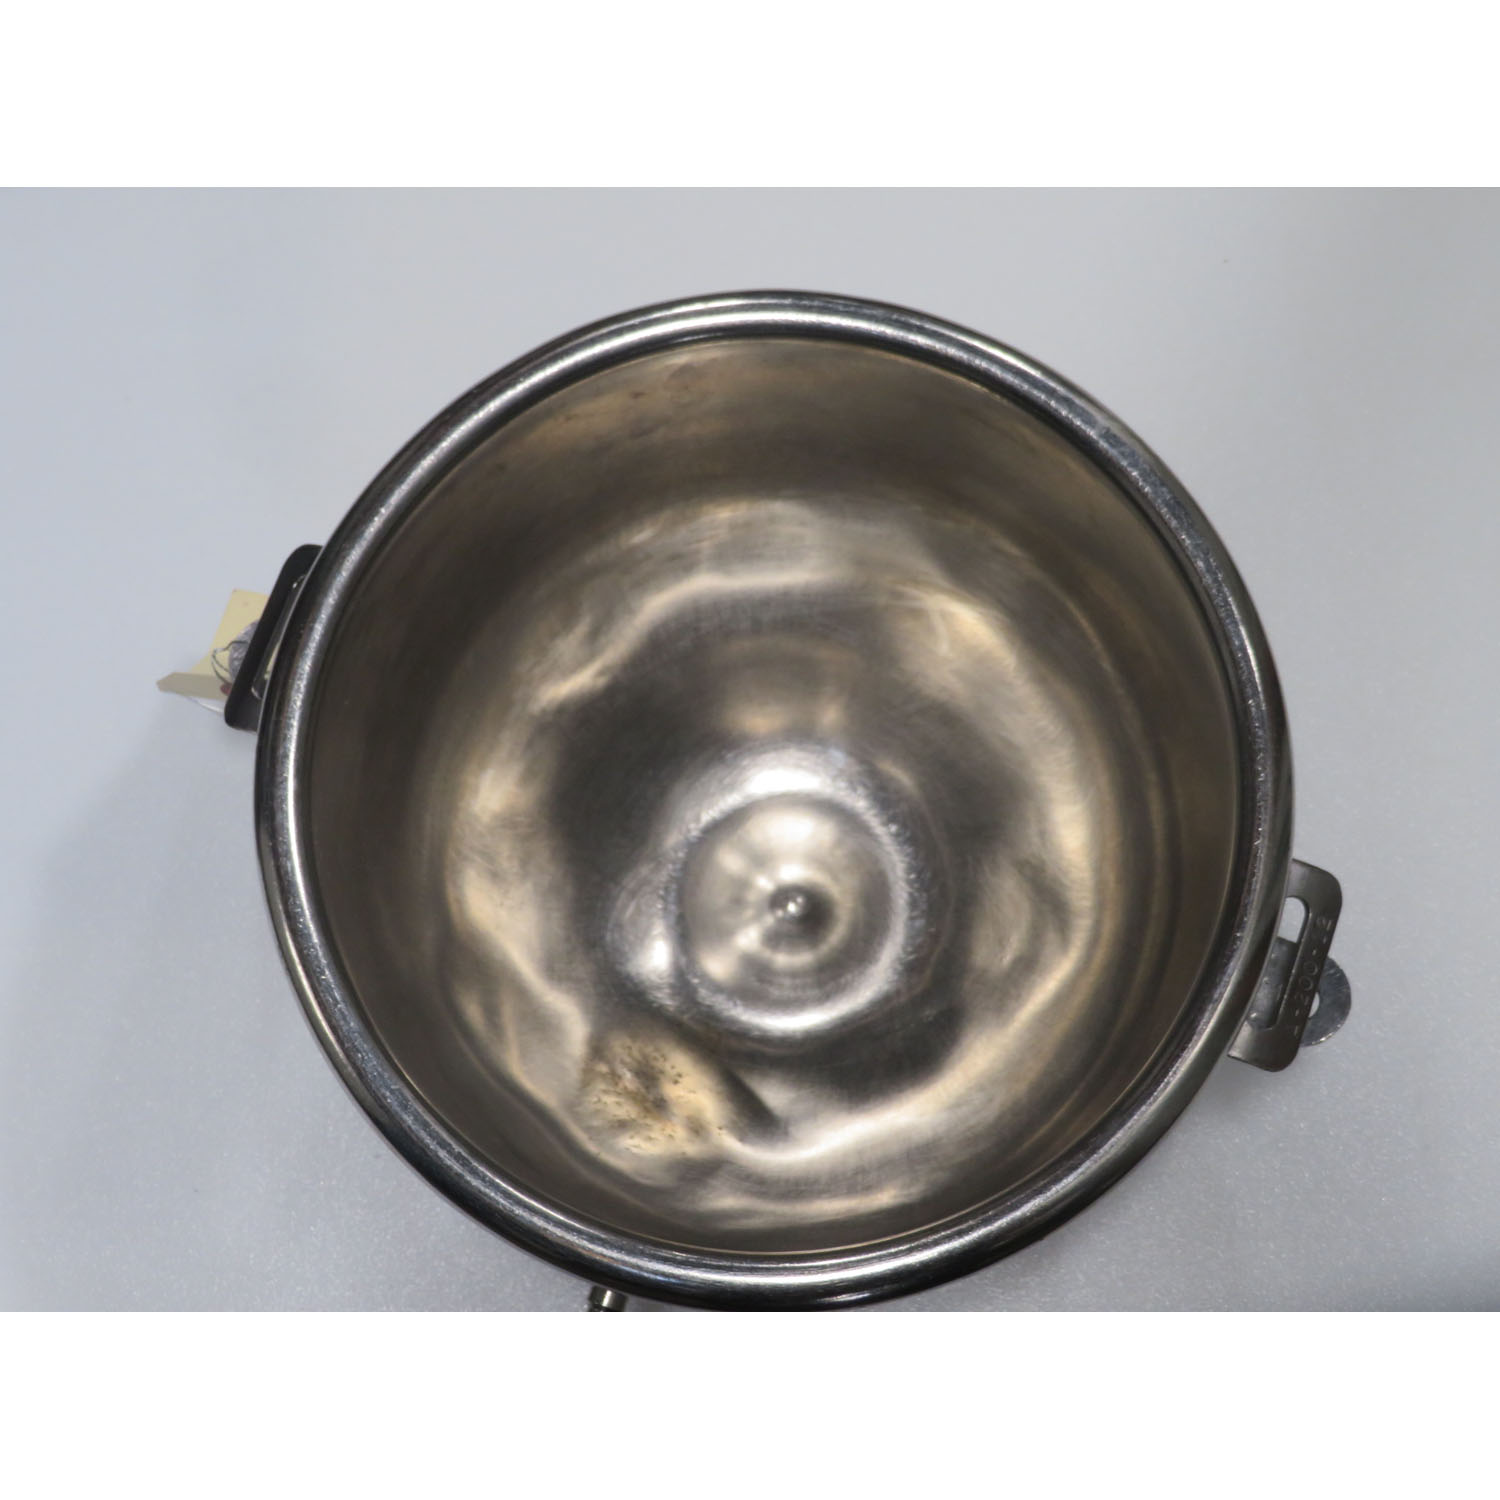 Hobart 00-295644 12 Quart Bowl to Fit A200 Mixer, Used Great Condition image 2